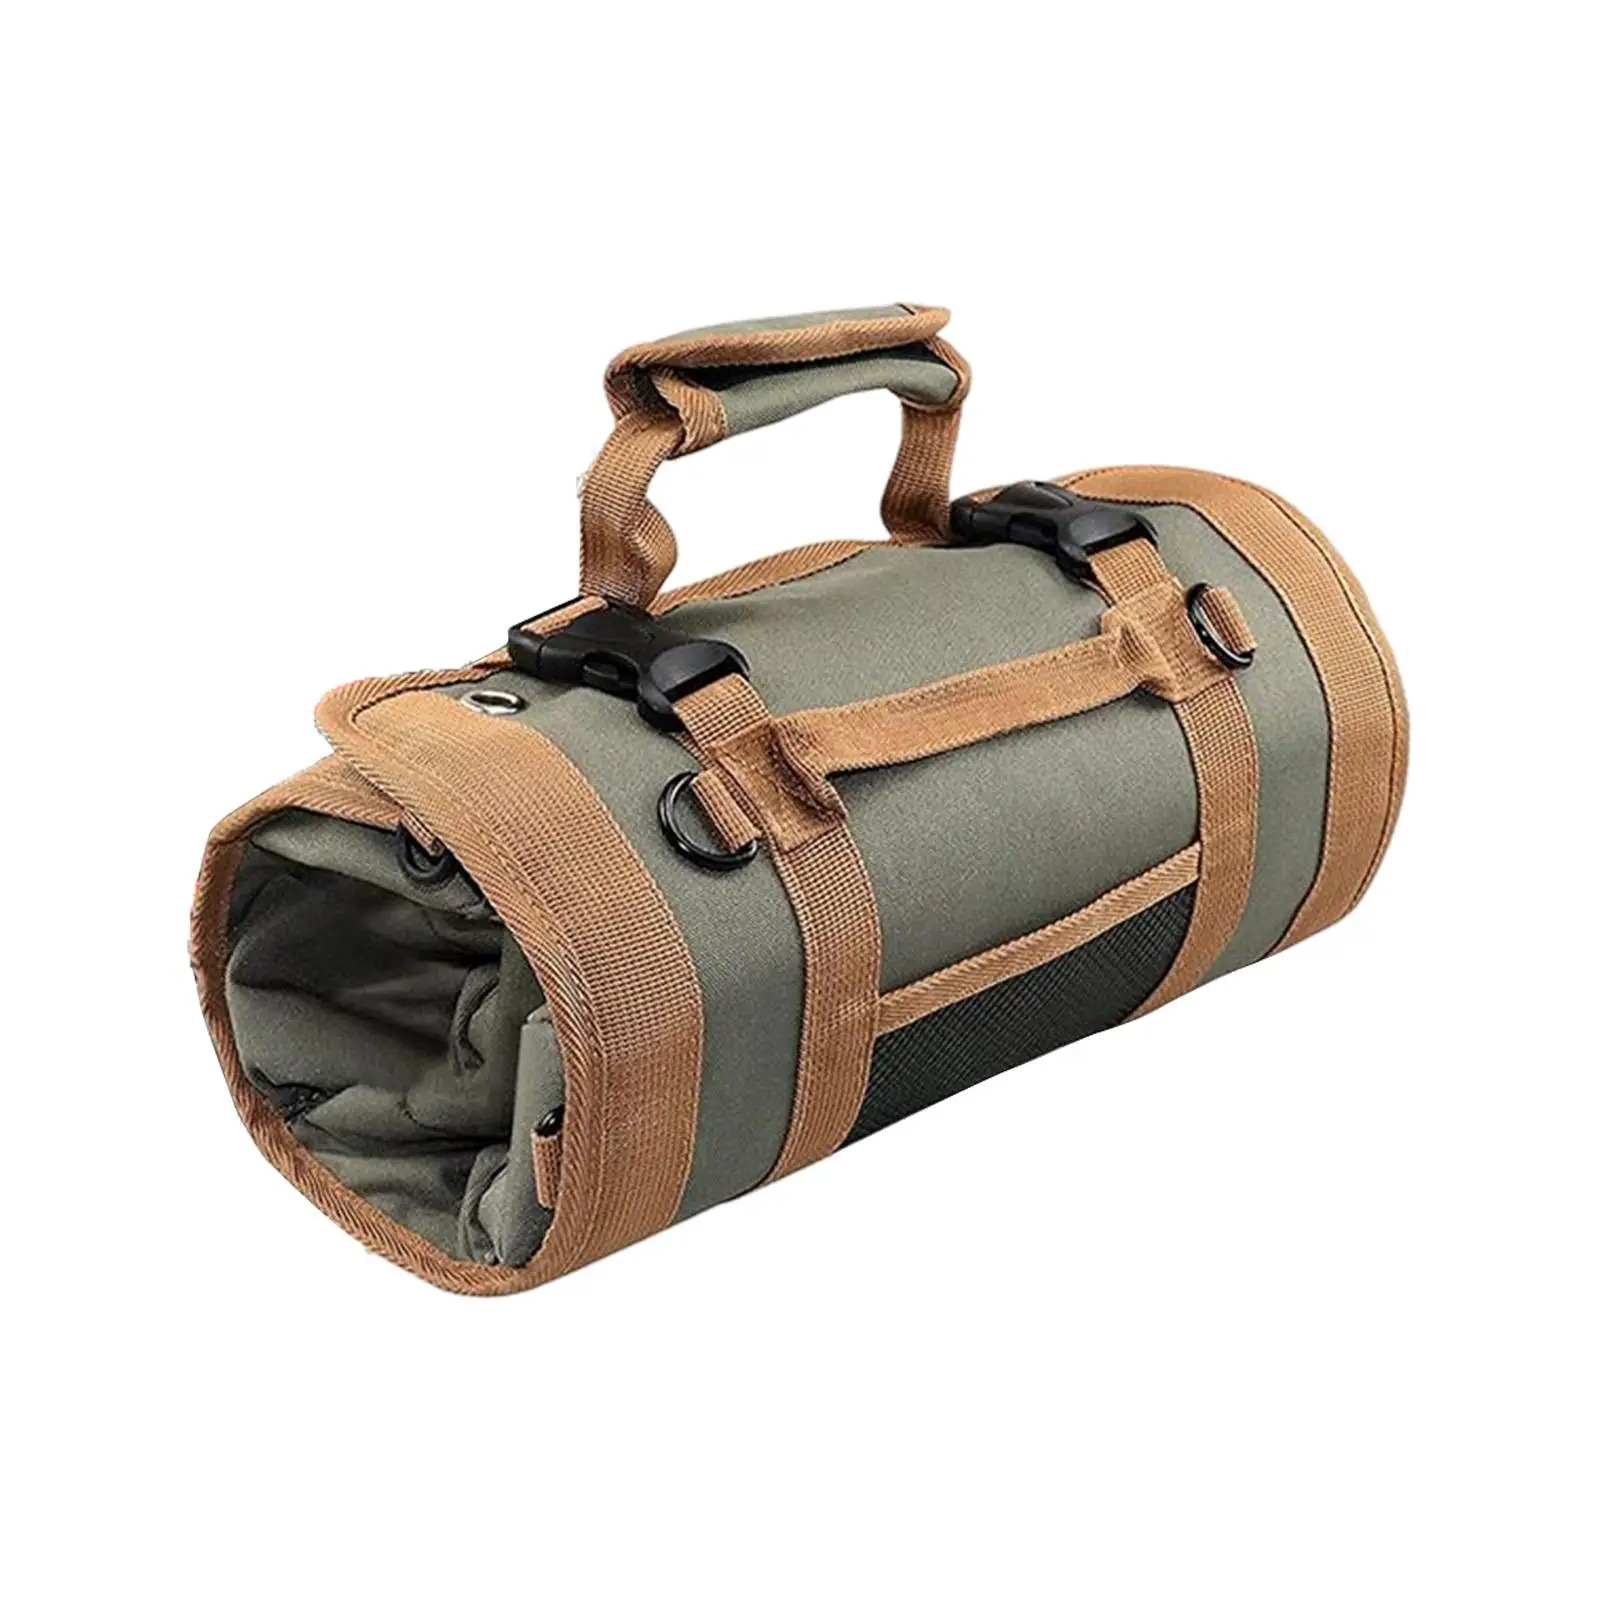 Tool Bag Roll up Small Tool Bag Case Maintenance Tool Bag Versatile Organizer Lightweight Storage for Camping Father Gifts